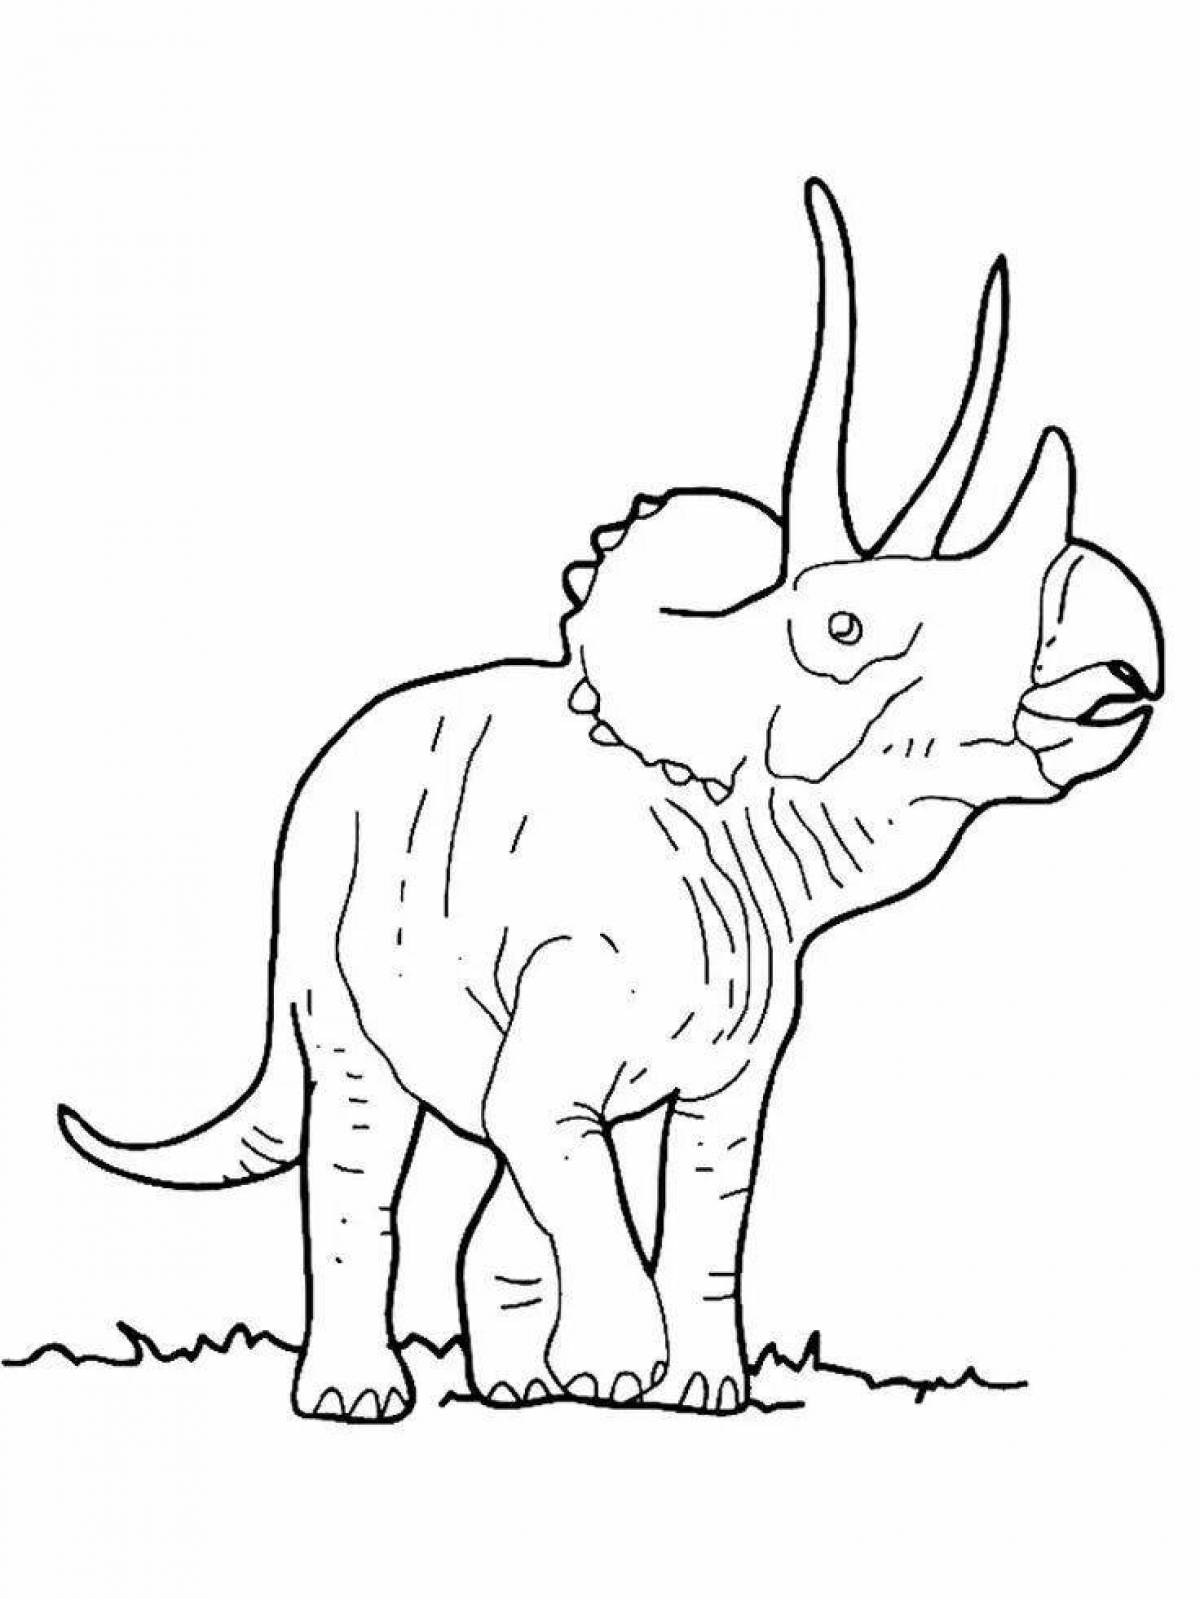 Coloring page magnificent triceratops